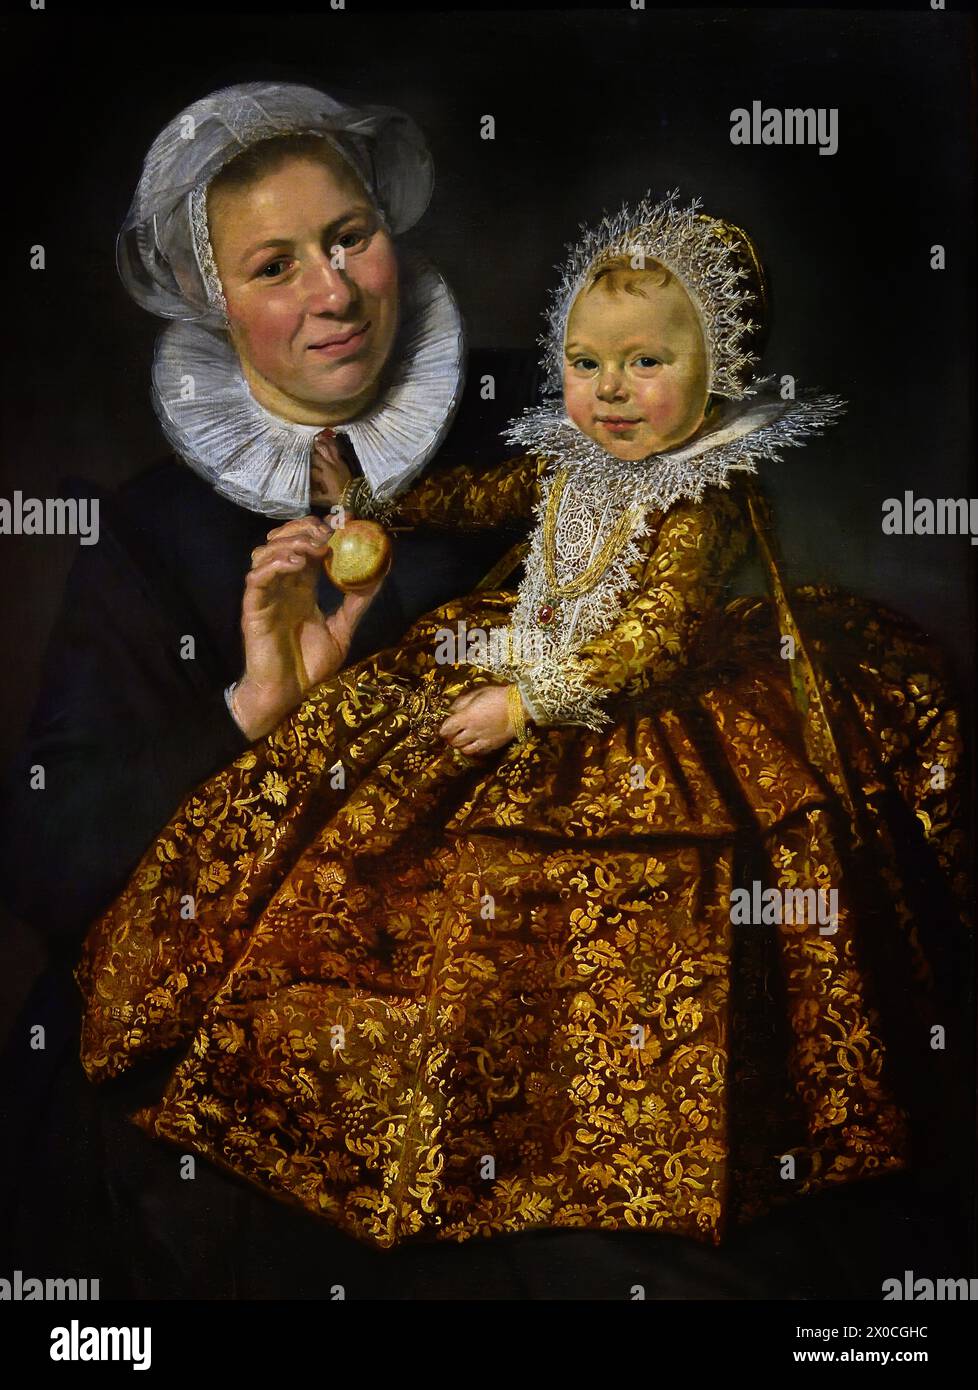 Catharina Hooft with her Nurse - 1620  Frans Hals, 1582-1666, Antwerp- Haarlem,  Dutch, The Netherlands, 17th century, Dutch Golden Age  ( Children's portrait of Frans Hals, which we still know. Dargestellt is Catharina Hooft, who was born in Amsterdam in 1618 as a single child elsewhere. We lived there during our stay in Haarlem, during our father's day, with the lawyer Pieter Hooft, and we lived there in our Berlin portrait. Ihr Onkel was the best Dutch poet, historian and dramatist Pieter Corneliszoon Hooft. ) Stock Photo